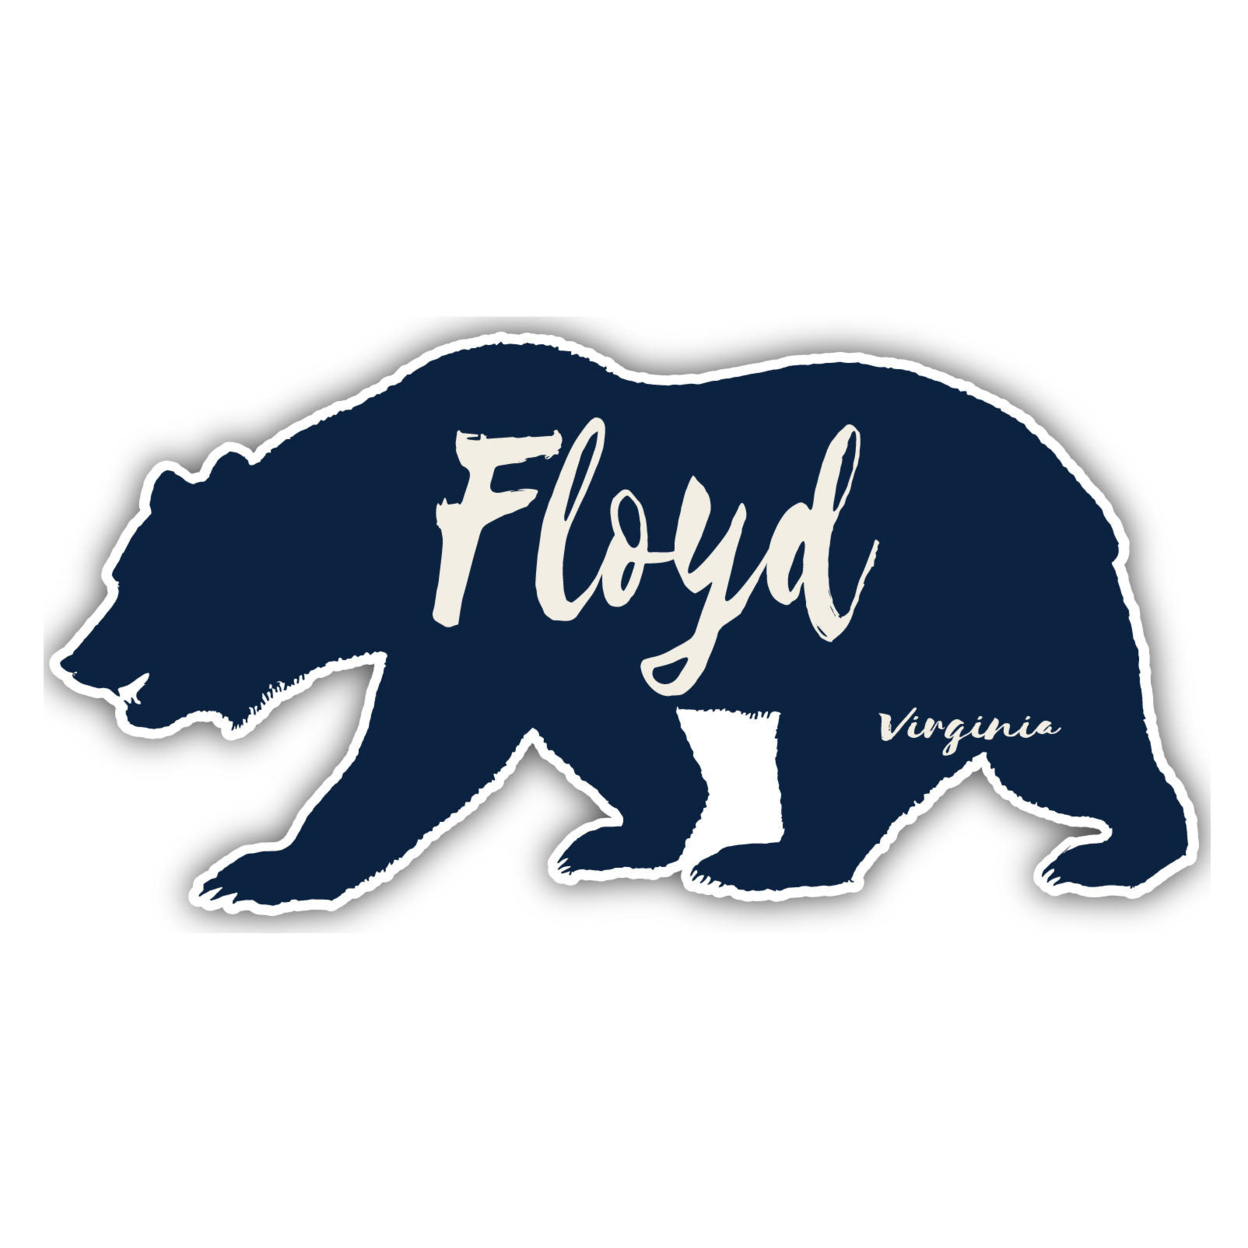 Floyd Virginia Souvenir Decorative Stickers (Choose Theme And Size) - 4-Pack, 12-Inch, Great Outdoors